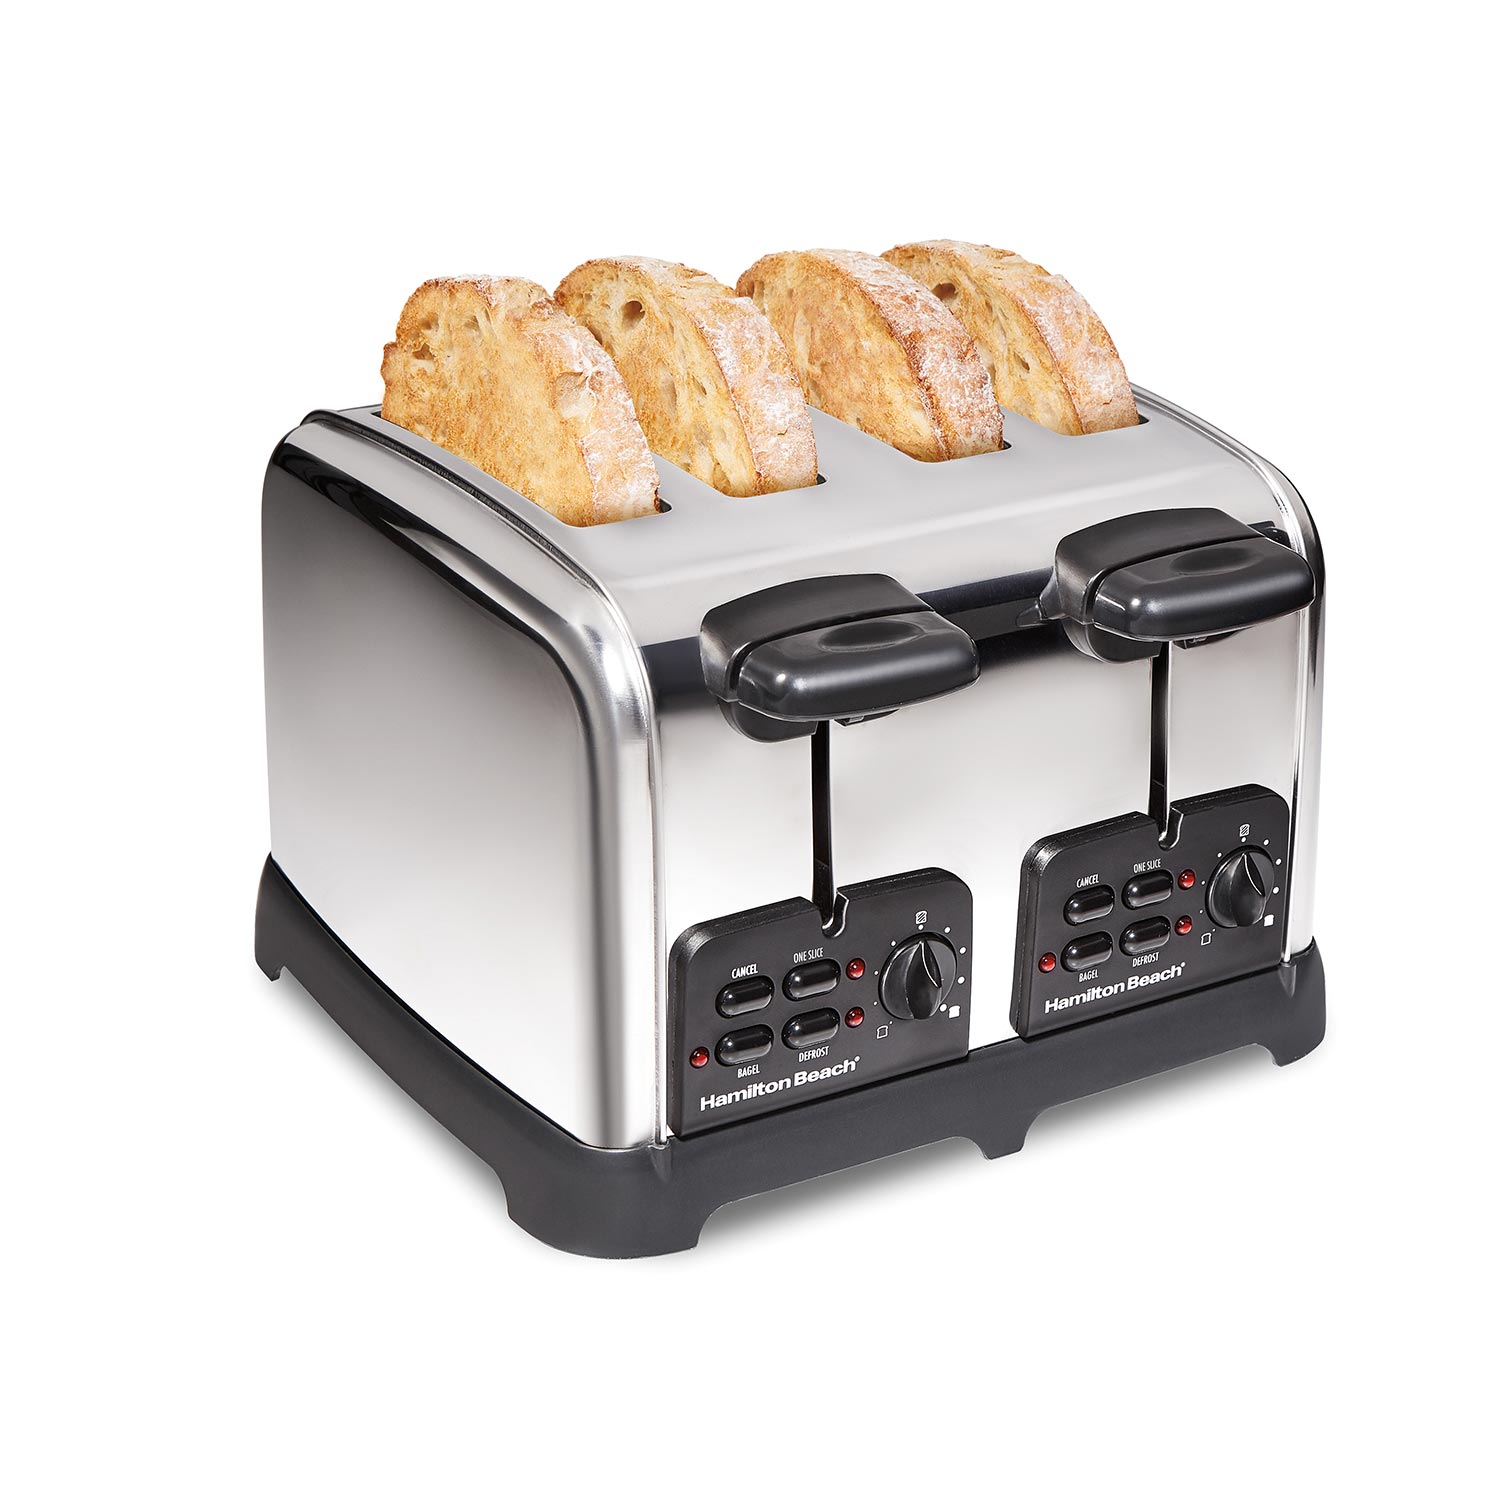 Classic 4 Slice Toaster with Sure-Toast Technology, Stainless Steel (24782)